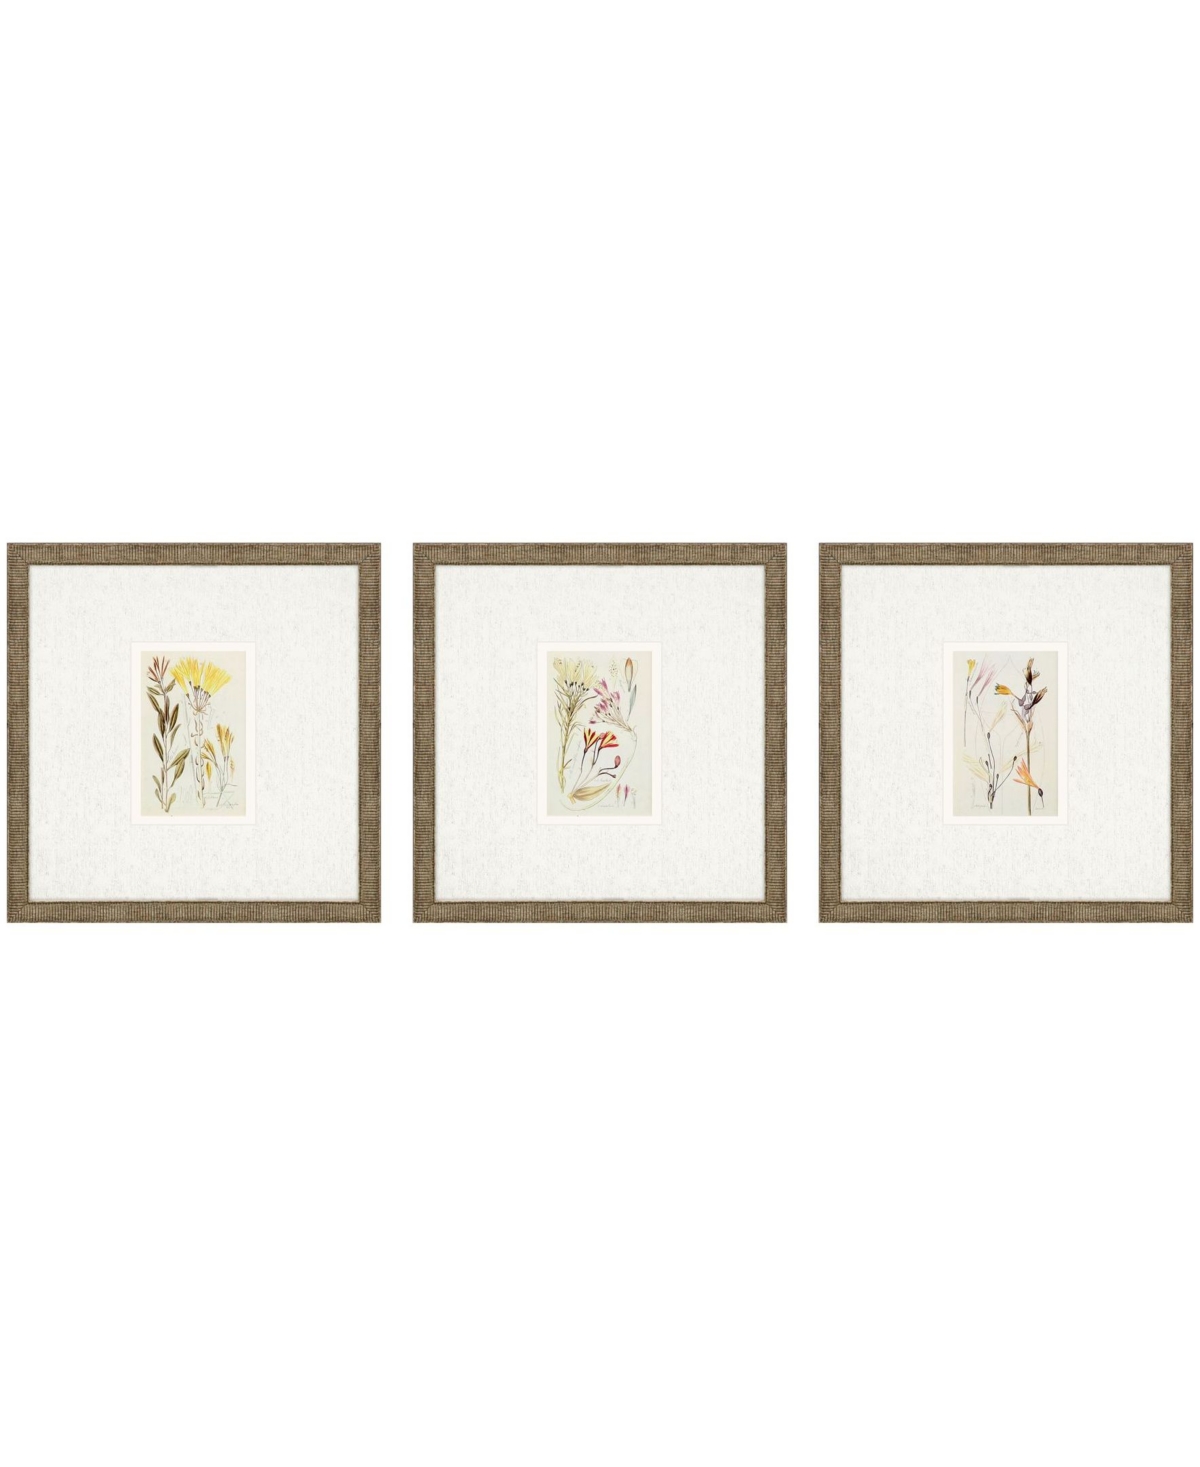 Paragon Picture Gallery Antique-like Botanical Ii Framed Art, Set Of 3 In Green